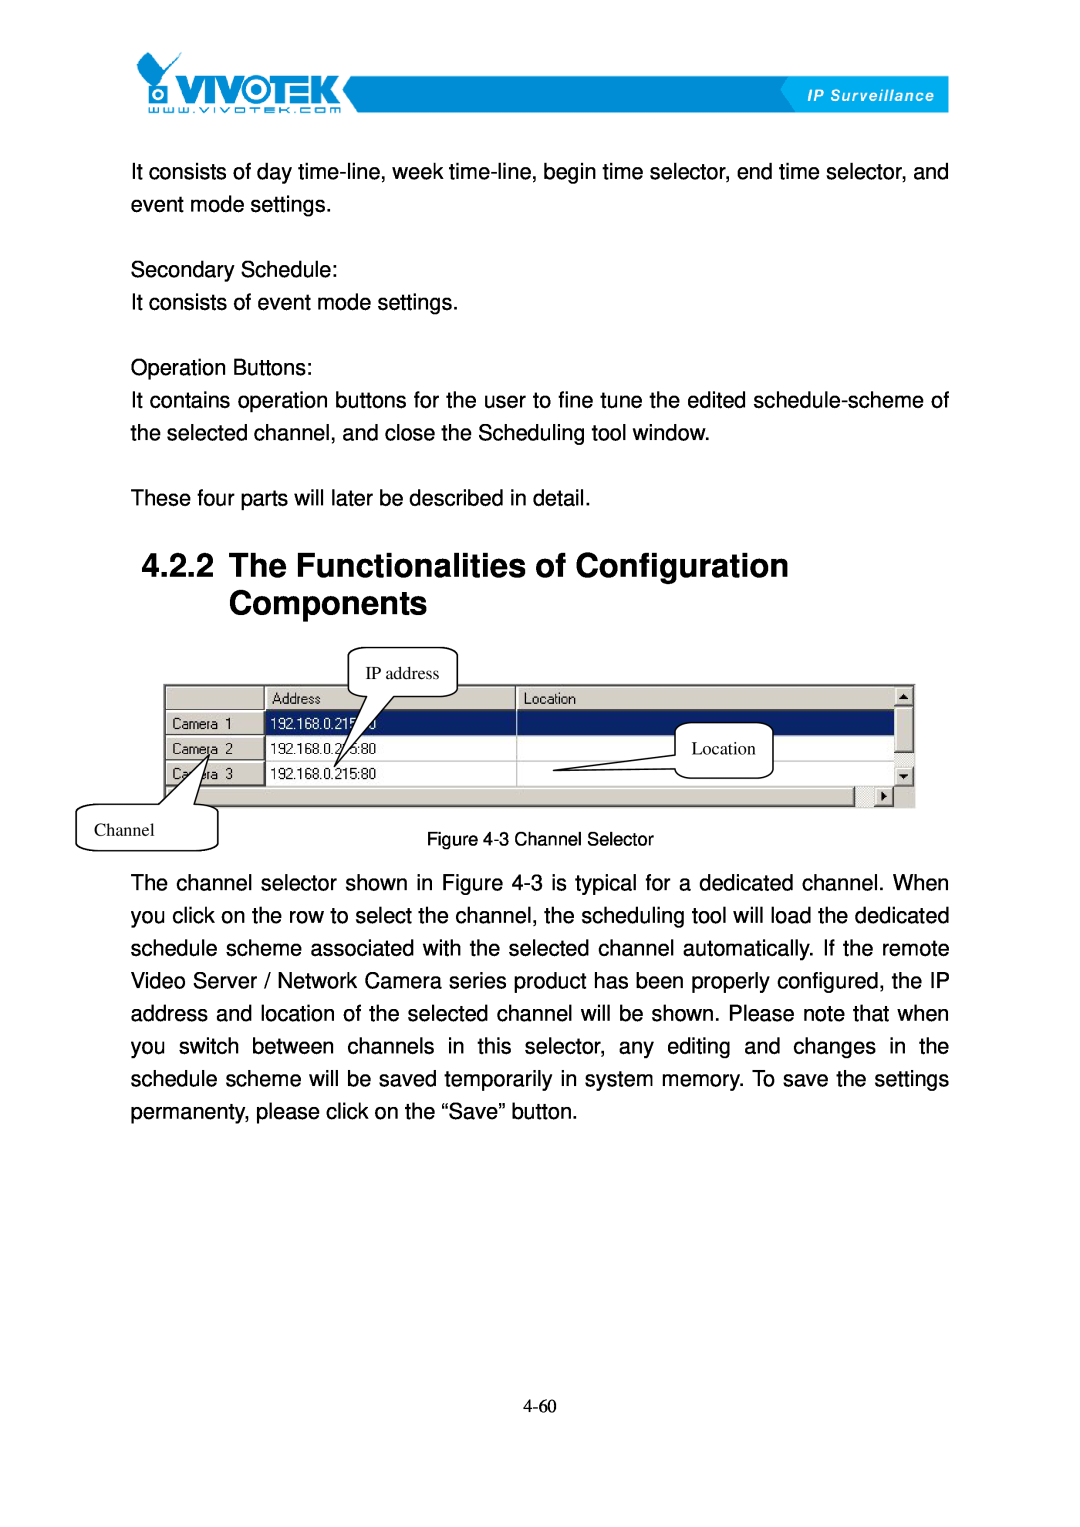 Vivotek ST3402 user manual 4.2.2 The48BFunctionalities of Configuration Components 